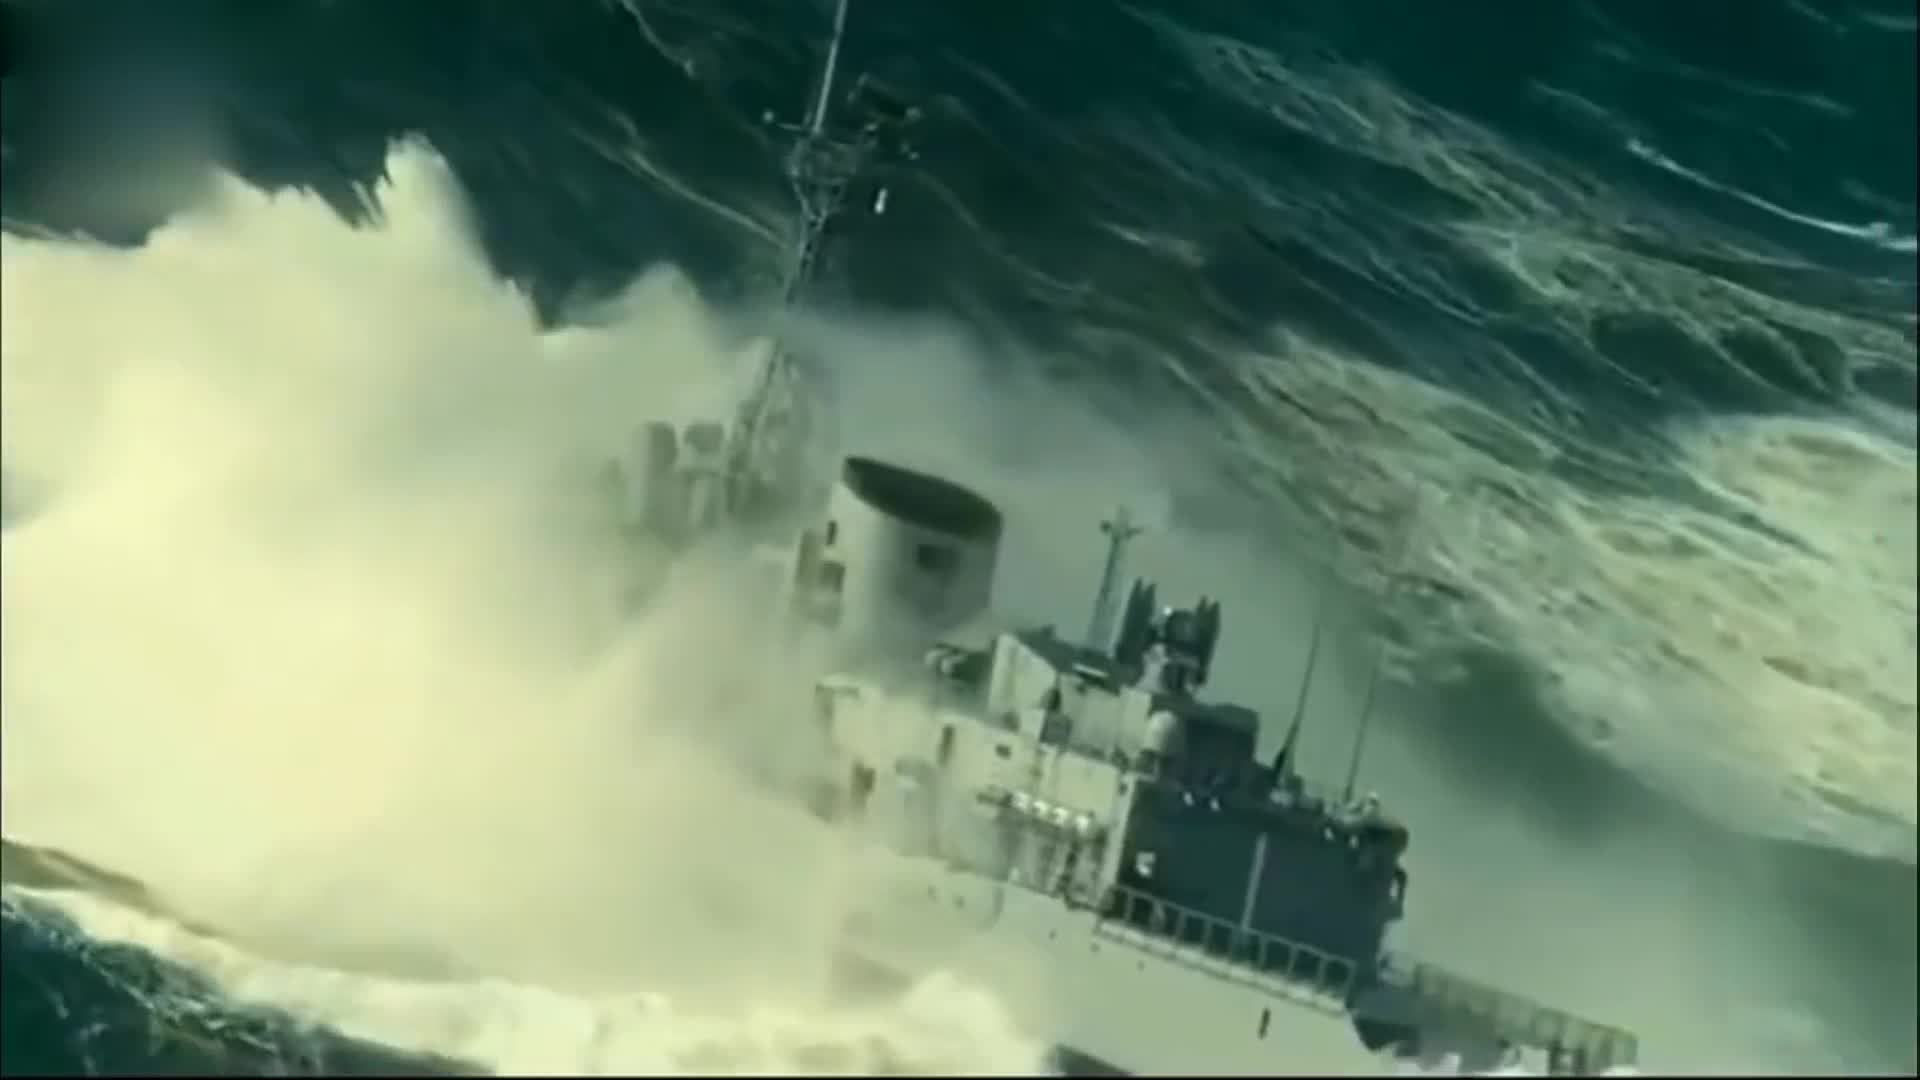 It's awesome that the ship is thrown into the air by the waves when it meets a huge wave tens of meters high in the sea.